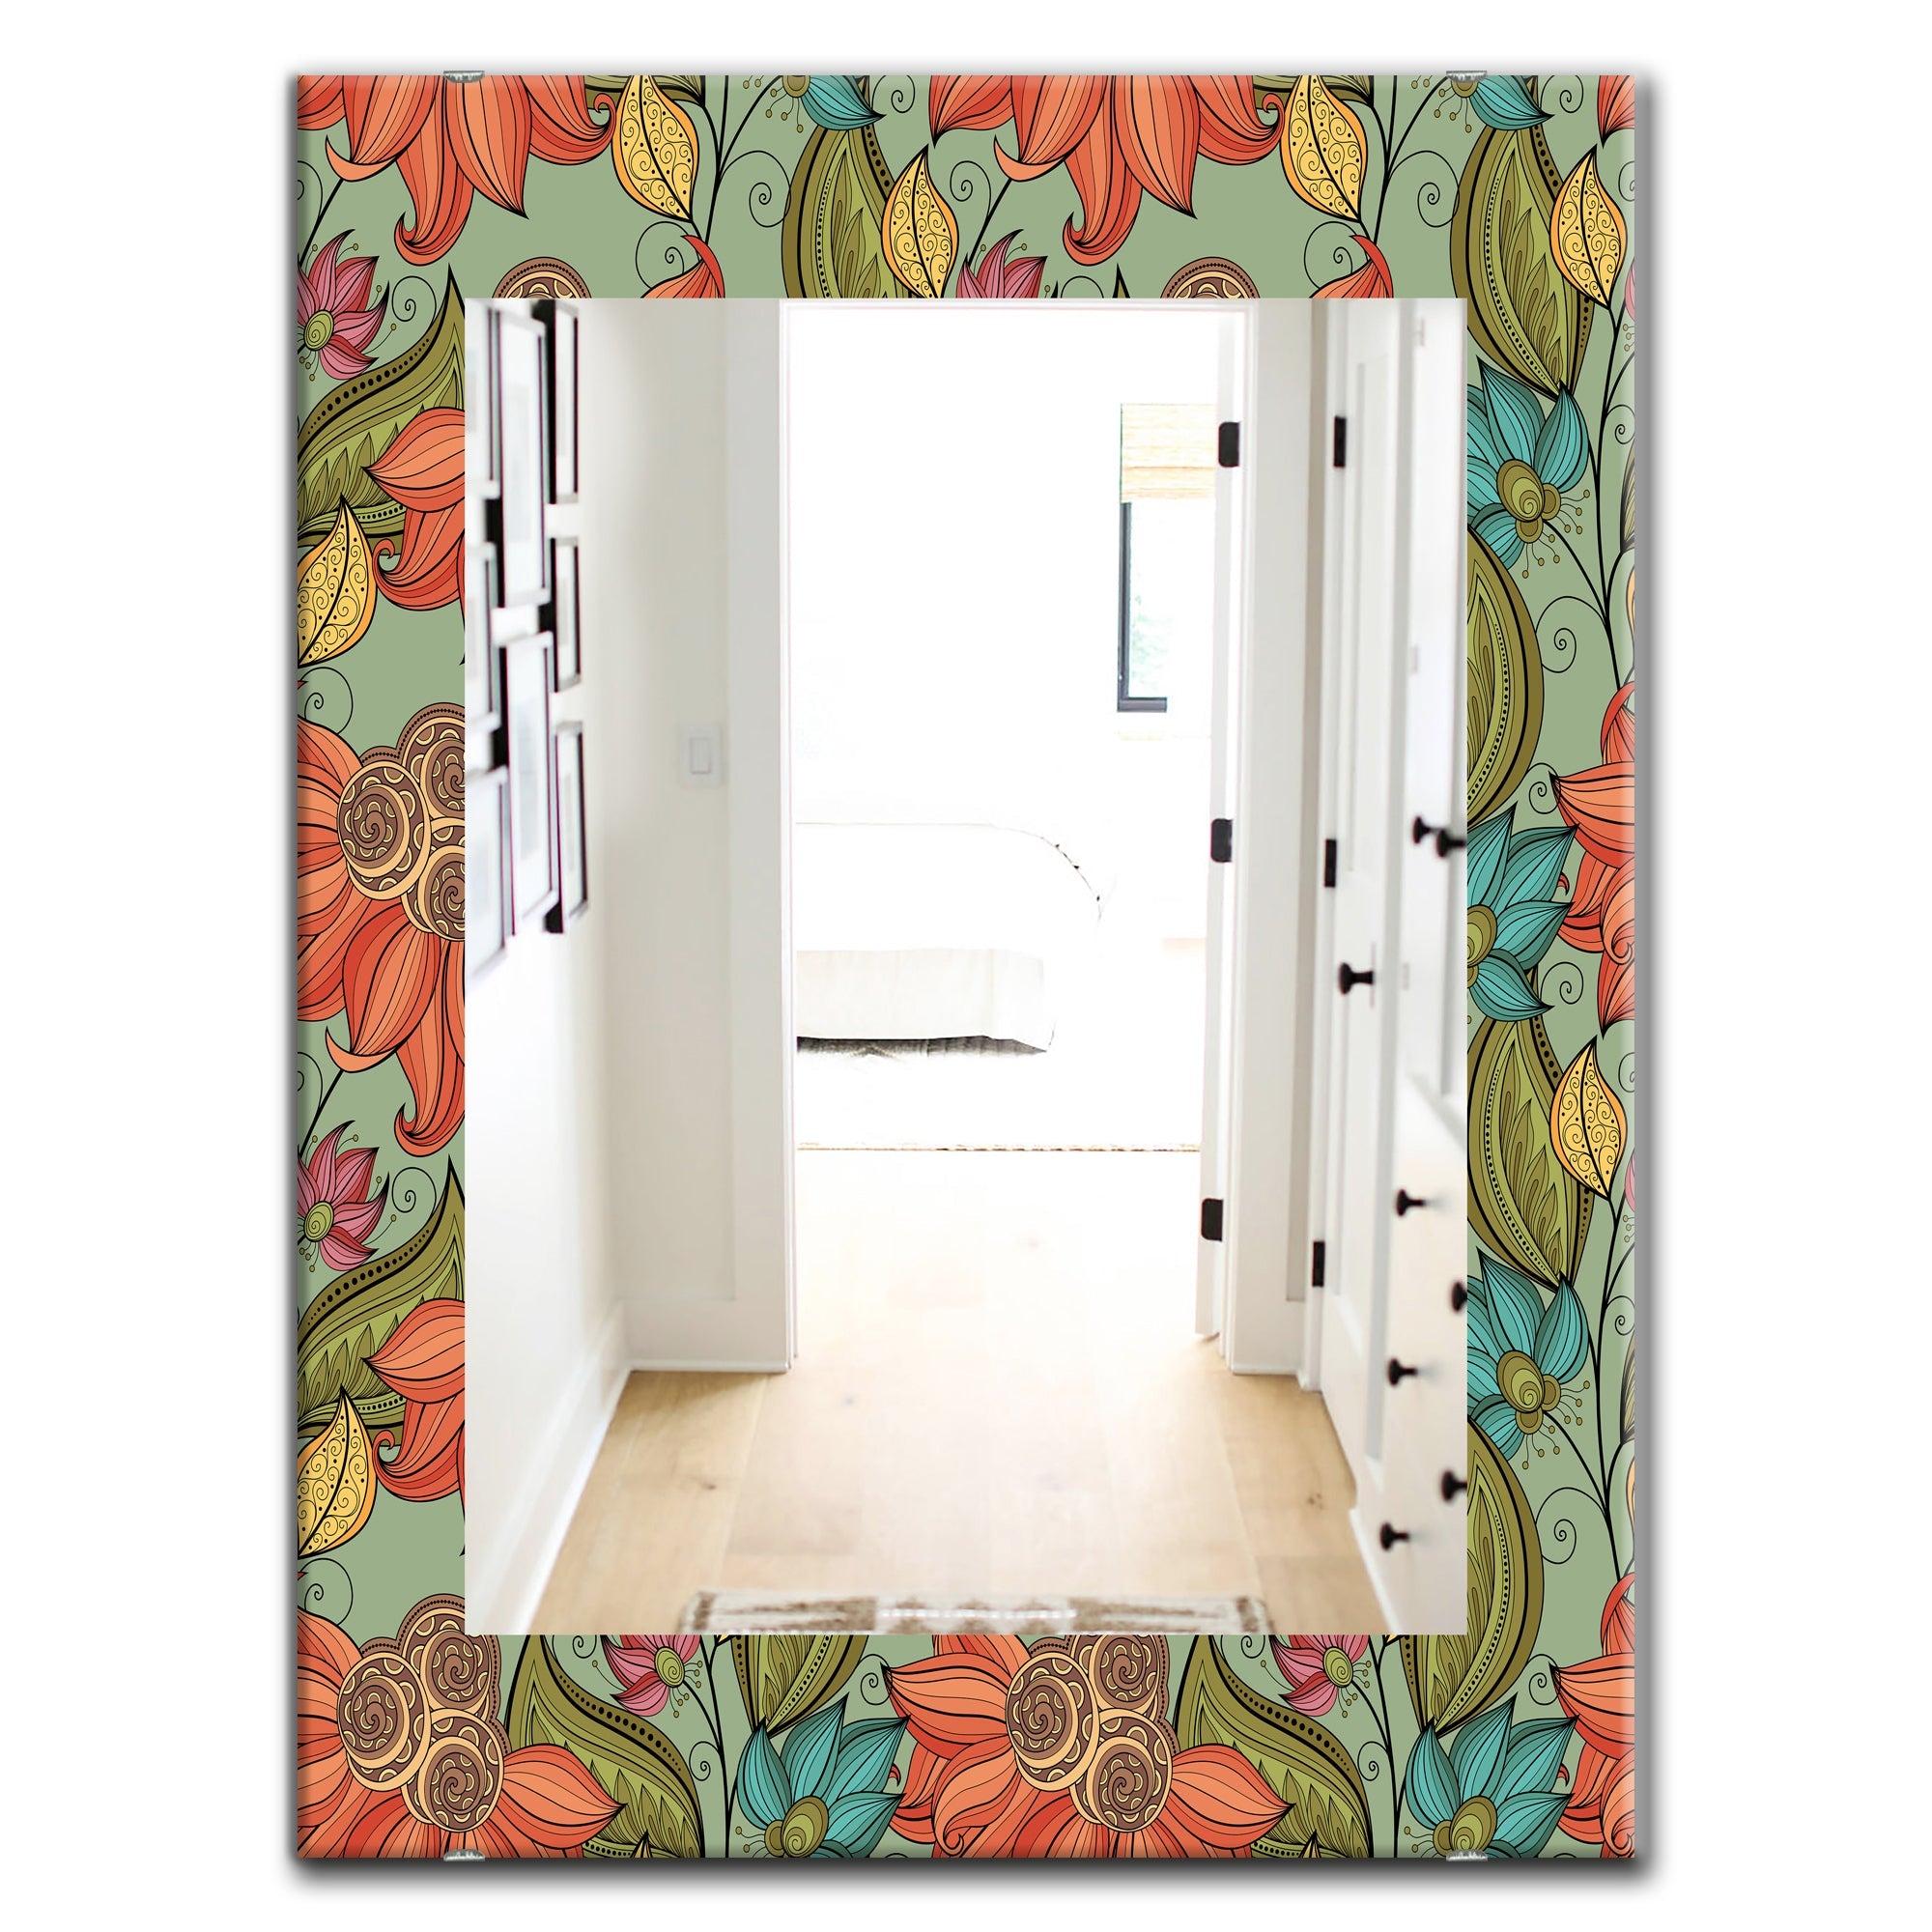 Colorful Floral Pattern I' Bohemian and Eclectic Mirror - Oval or Round Wall Mirror